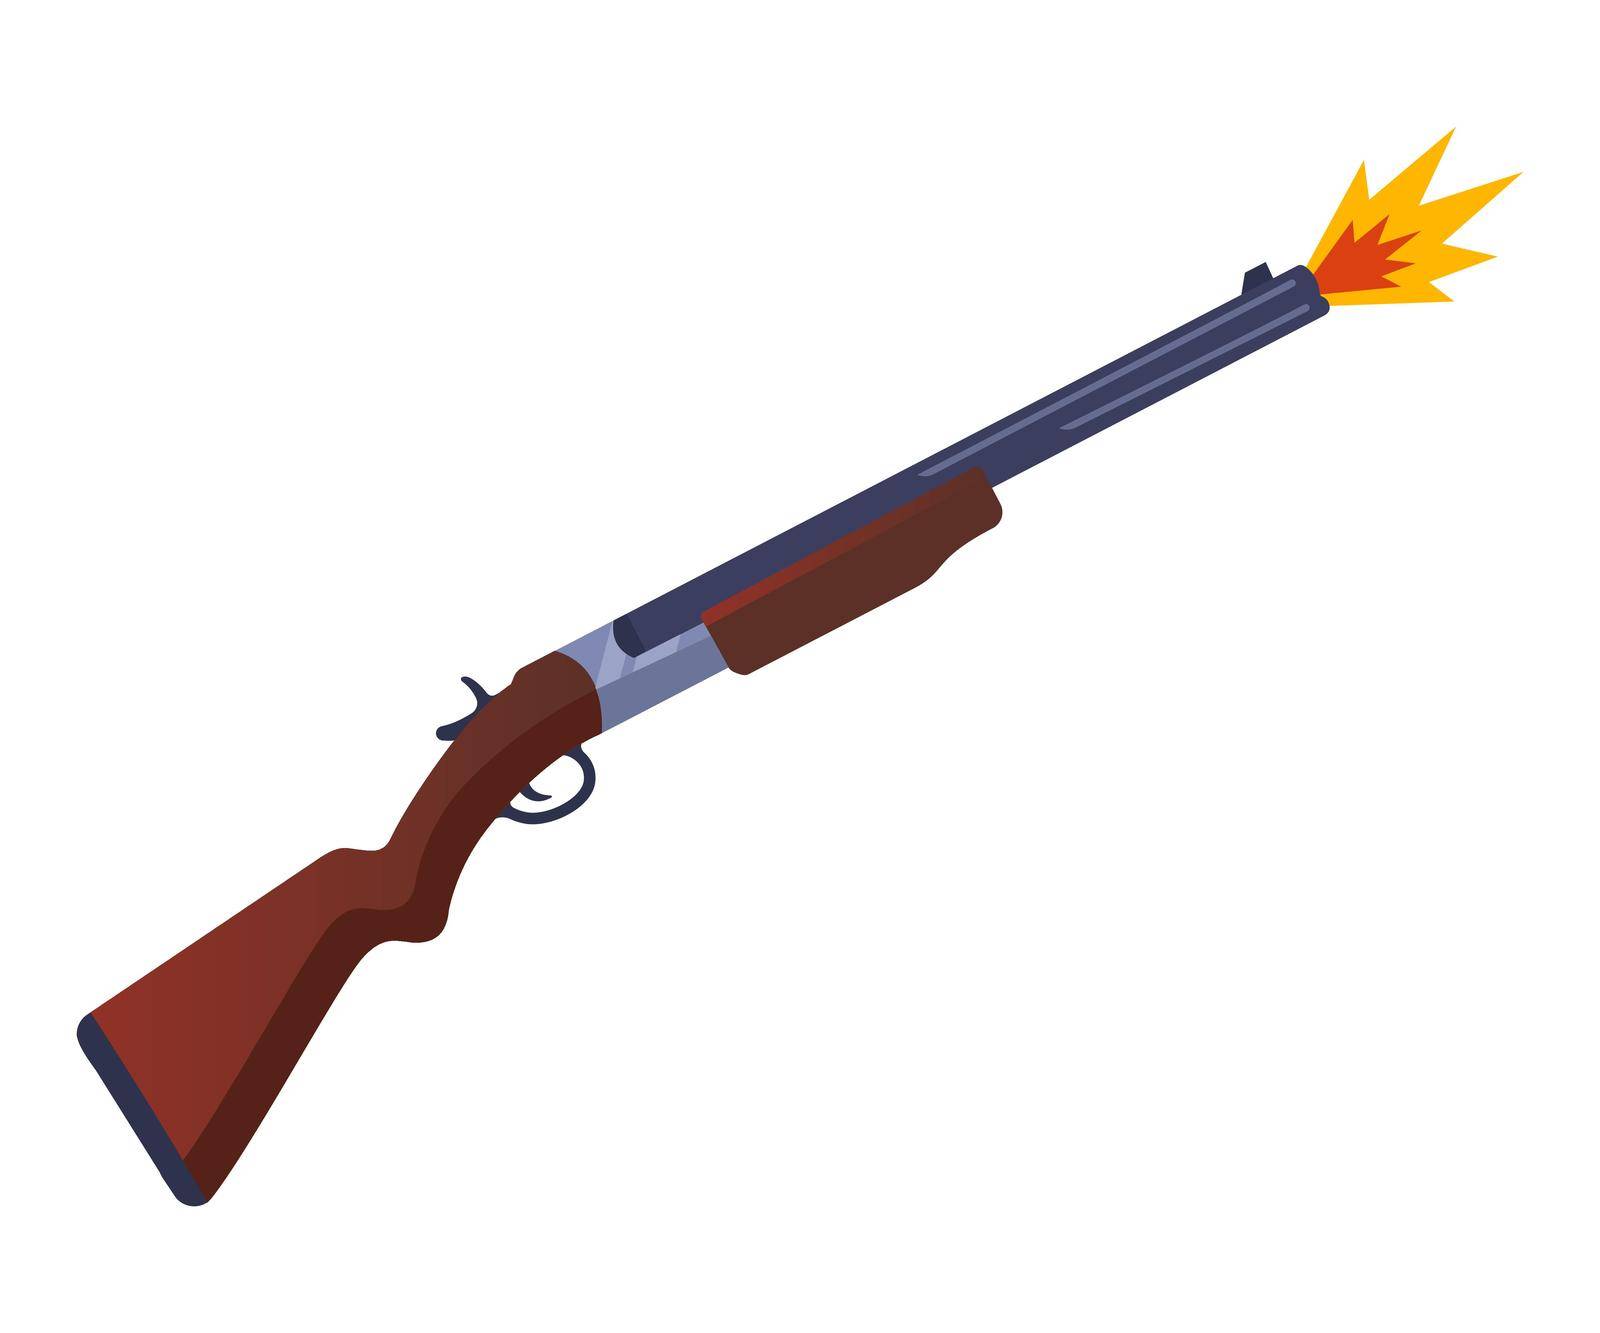 shot from a gun on a hunt. a shot from a weapon at a target. flat vector illustration.